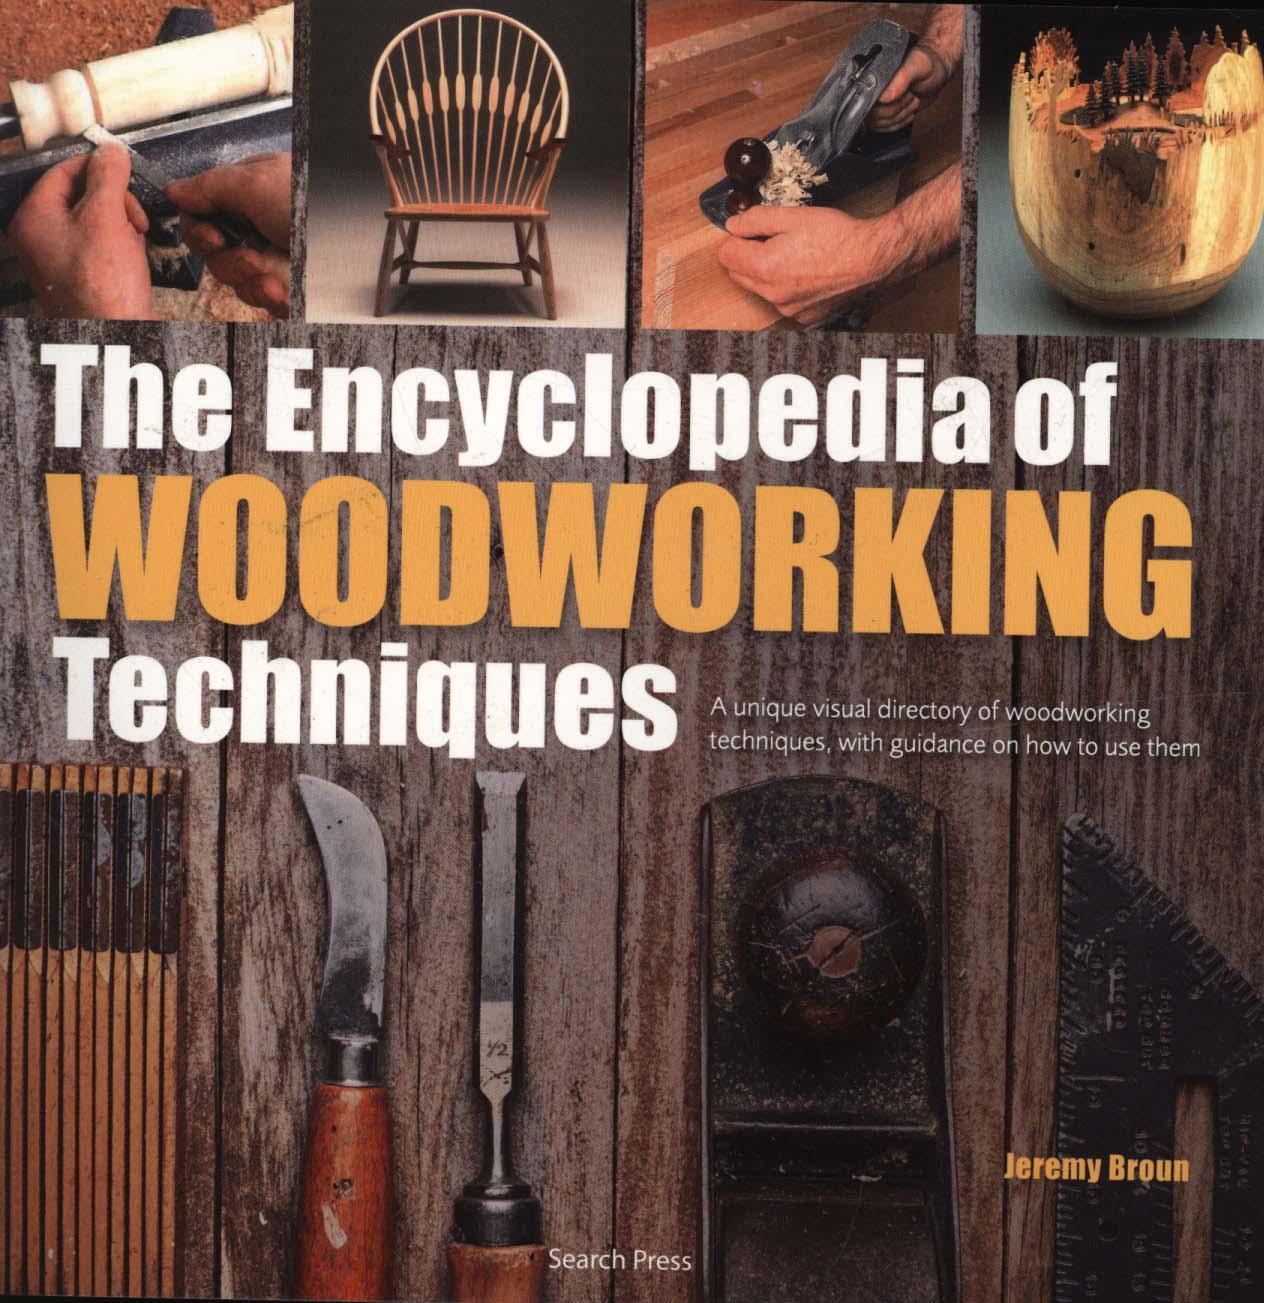 Encyclopedia of Woodworking Techniques